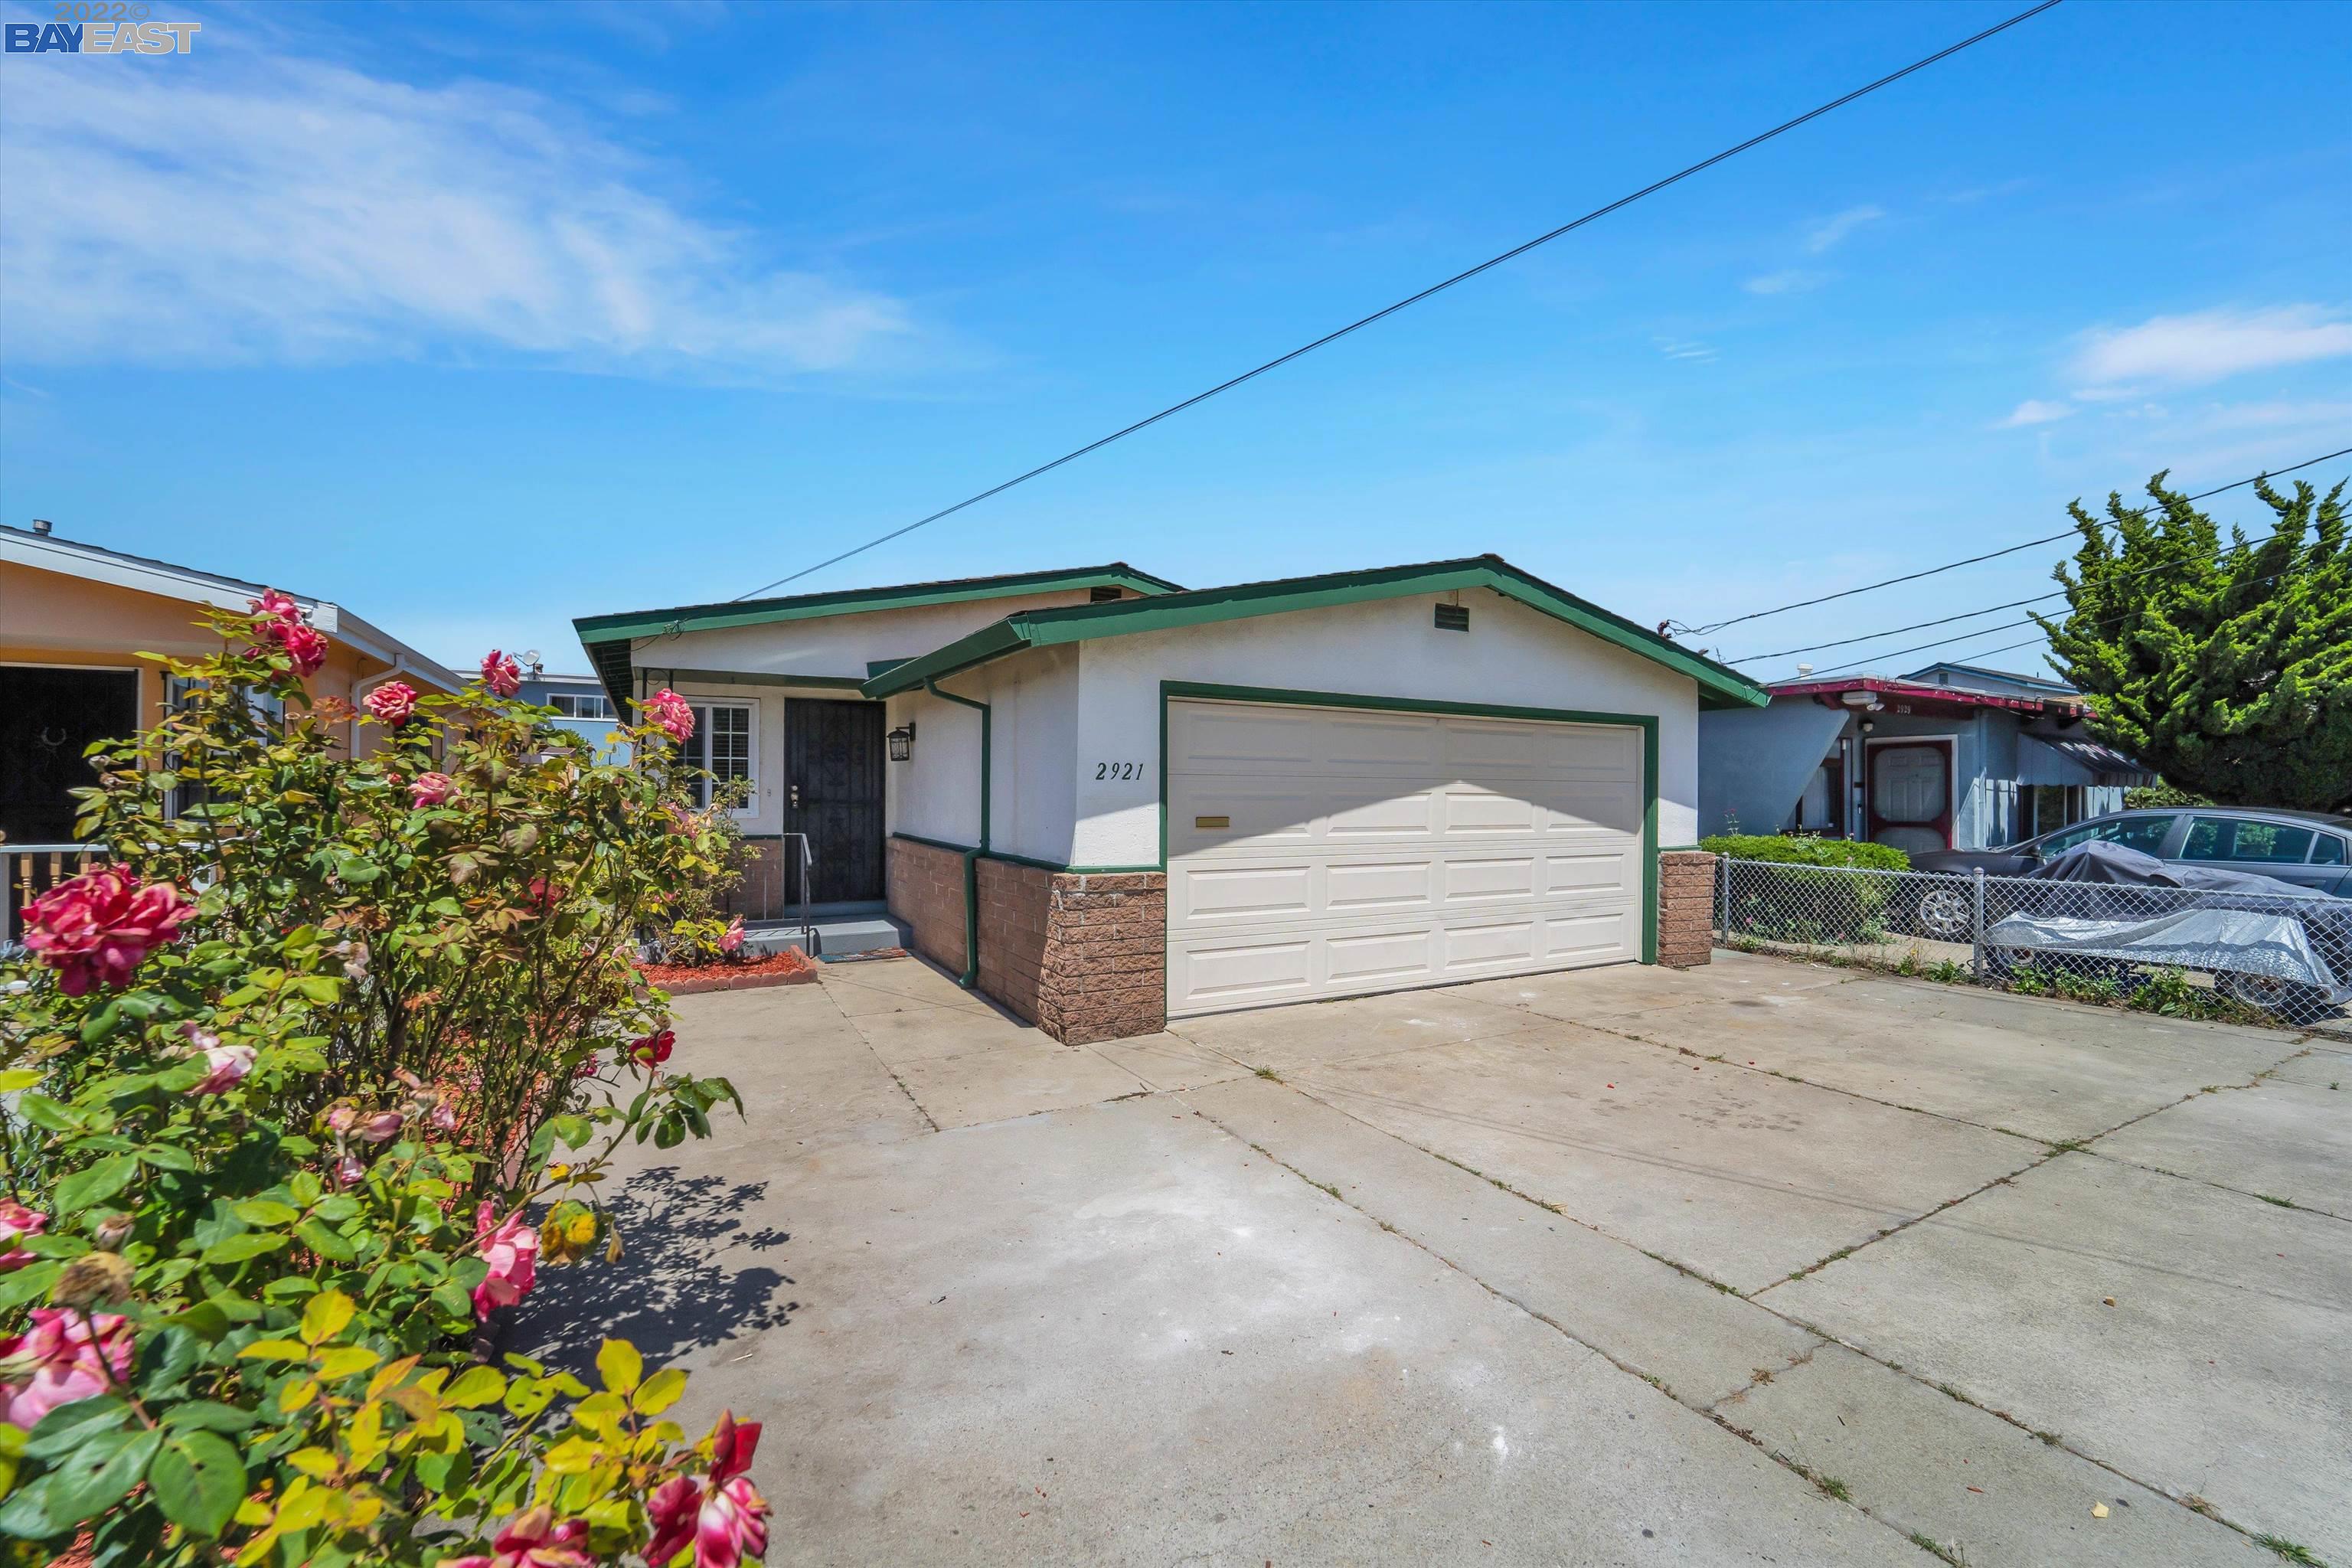 Beautifully updated home in San Pablo. Updates include countertops, appliances, paint, light fixtures, and more! Conveniently nestled away in a safe neighborhood that is close to schools, shopping, and commuting. Come make this house your home!